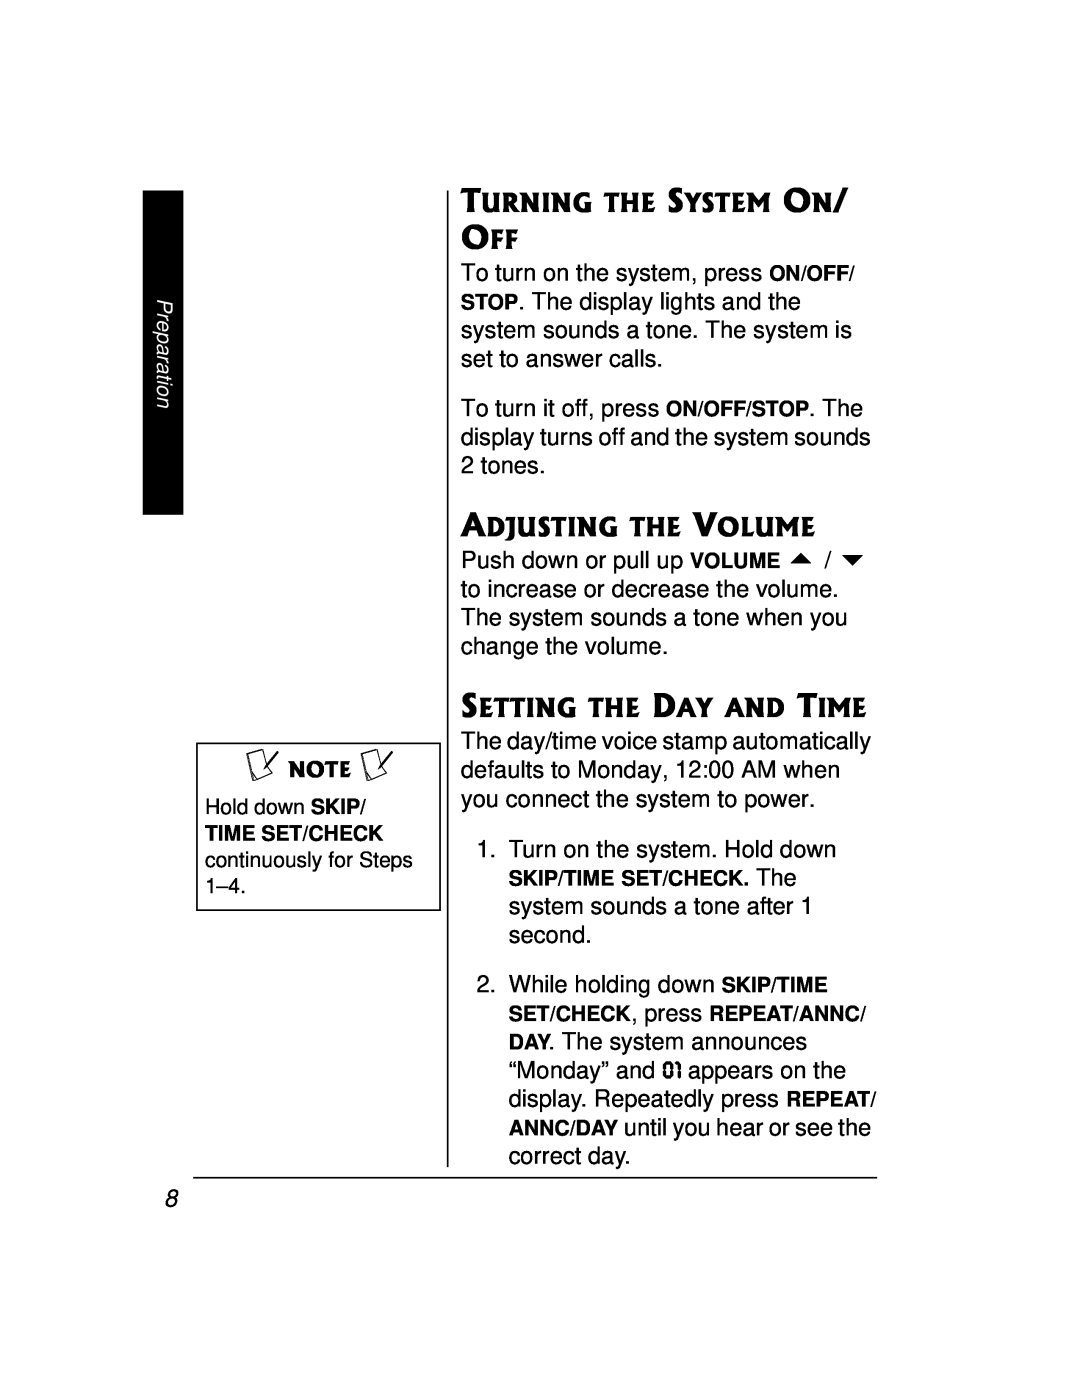 Radio Shack 43-3888 Turning The System On/ Off, Setting The Day And Time, Hold down SKIP, continuously for Steps 